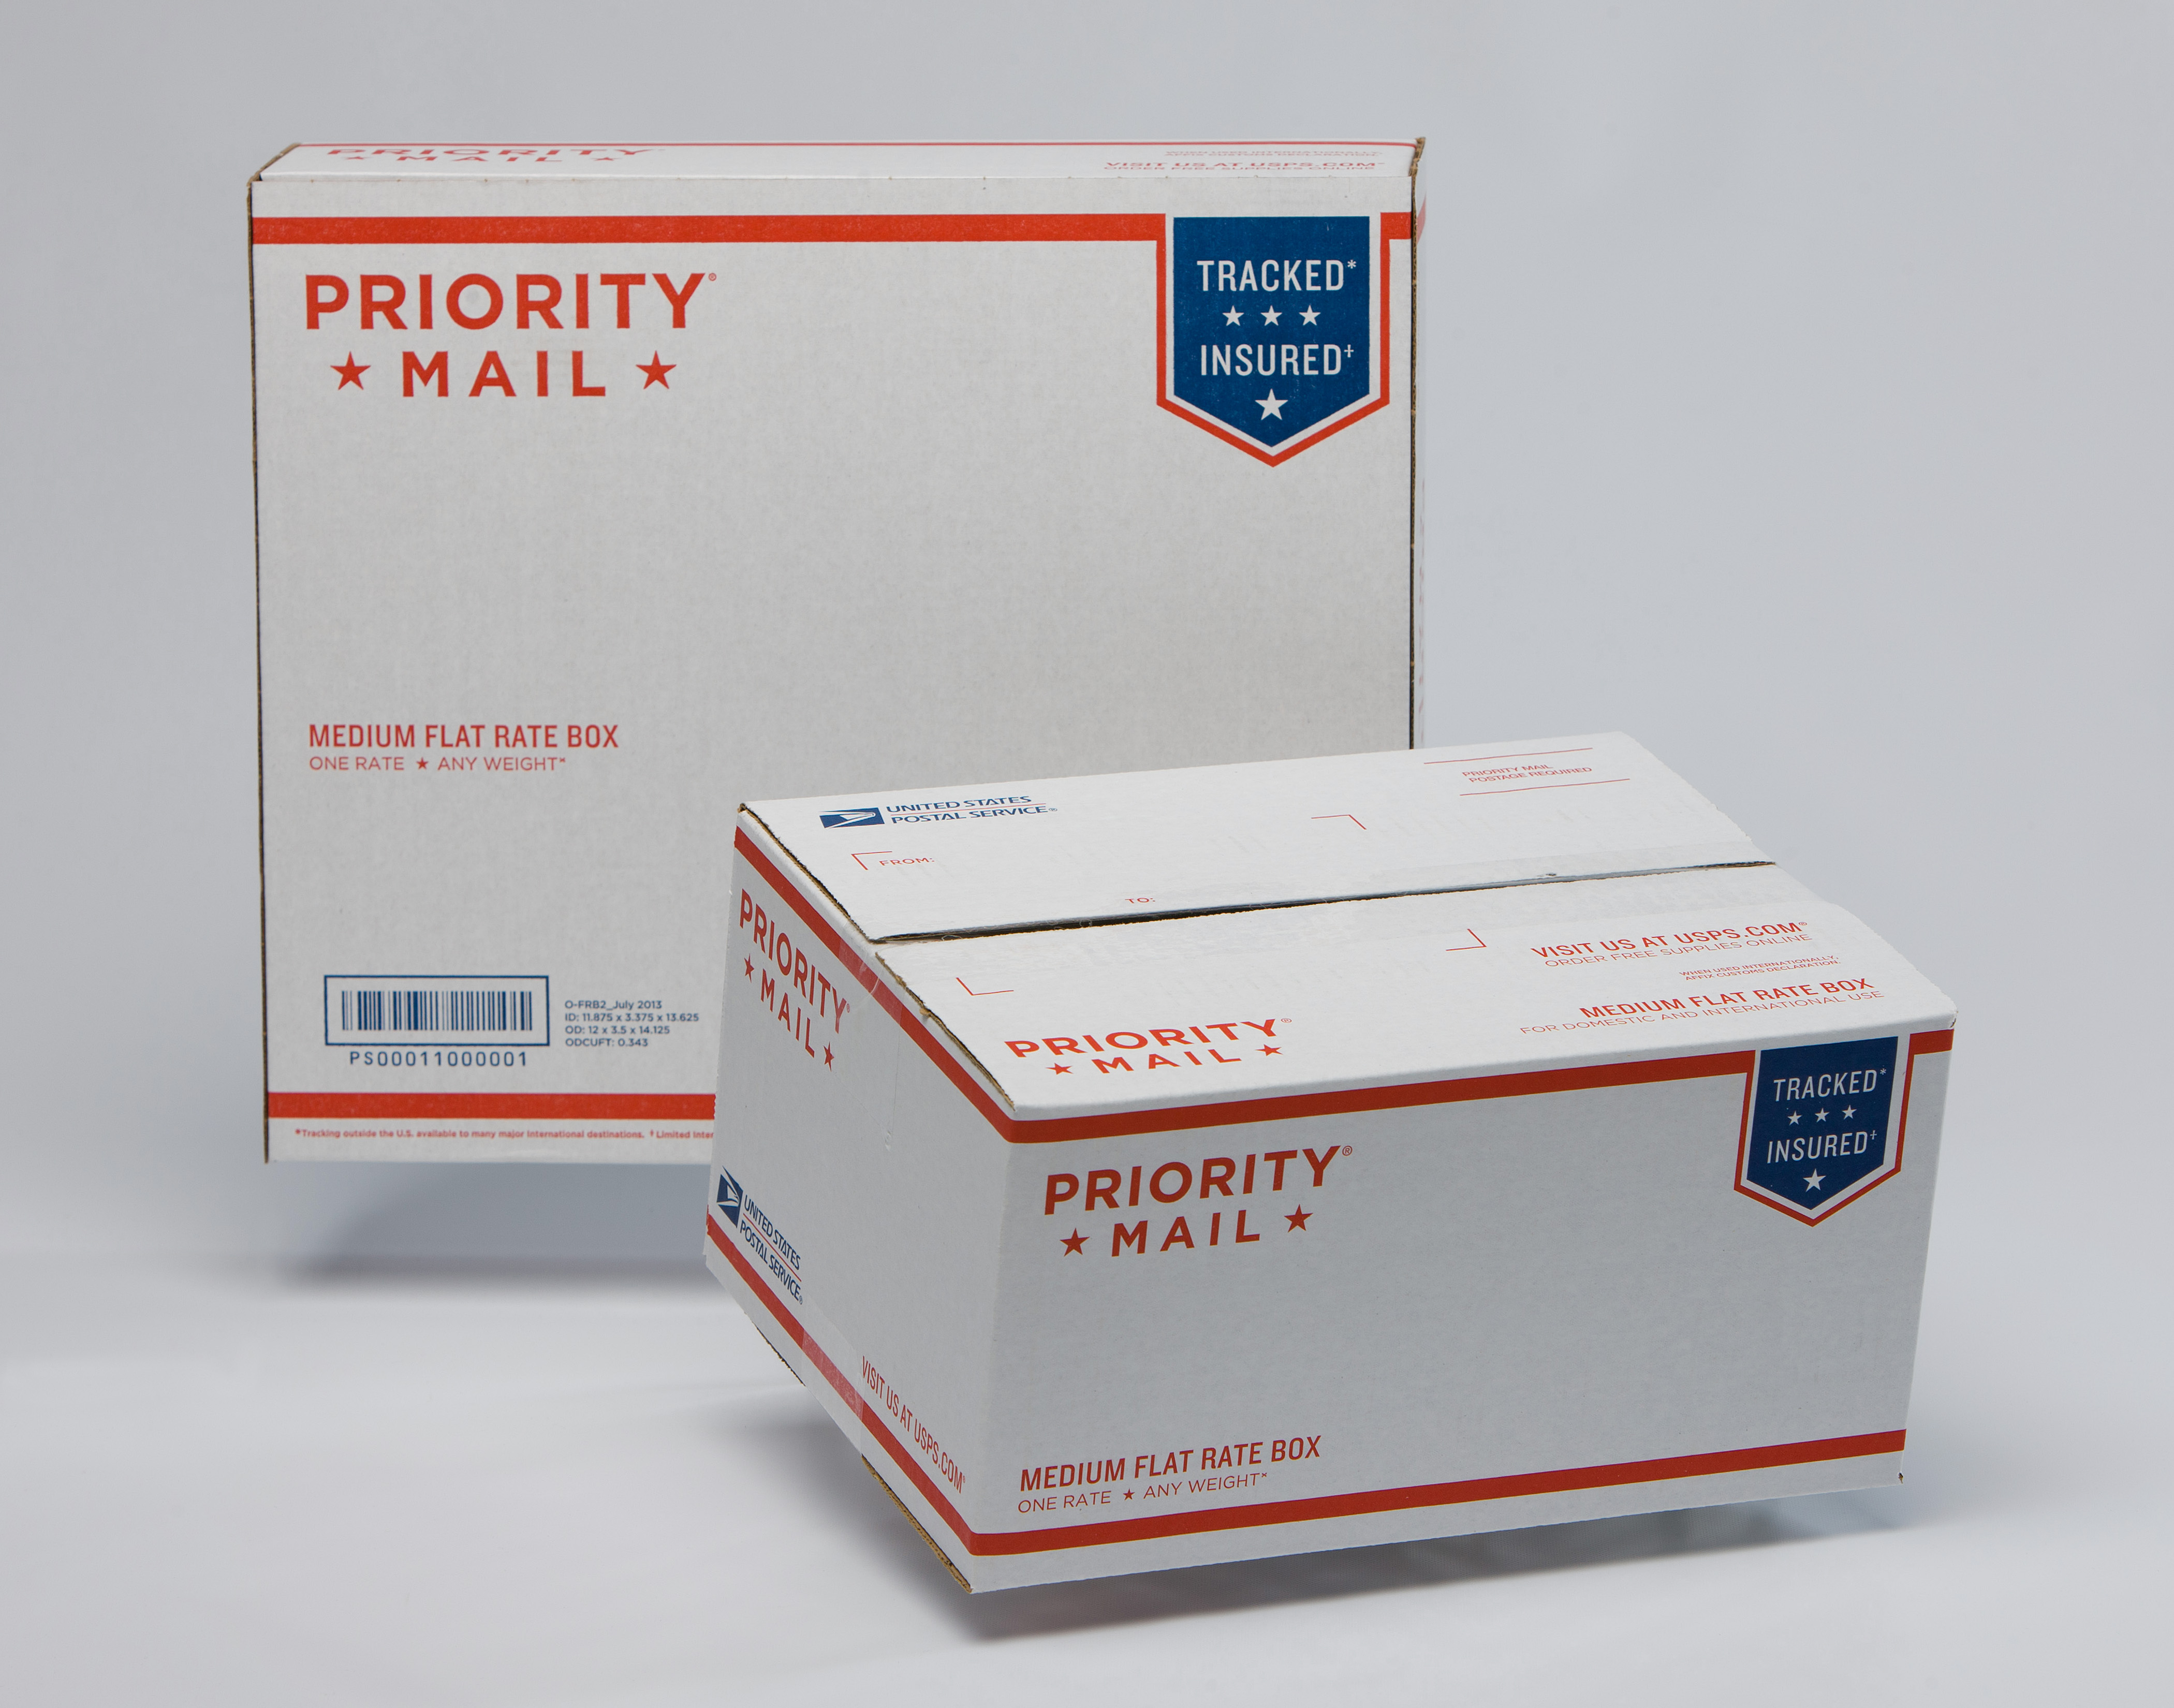 Prices of usps flat rate boxes qosaposter